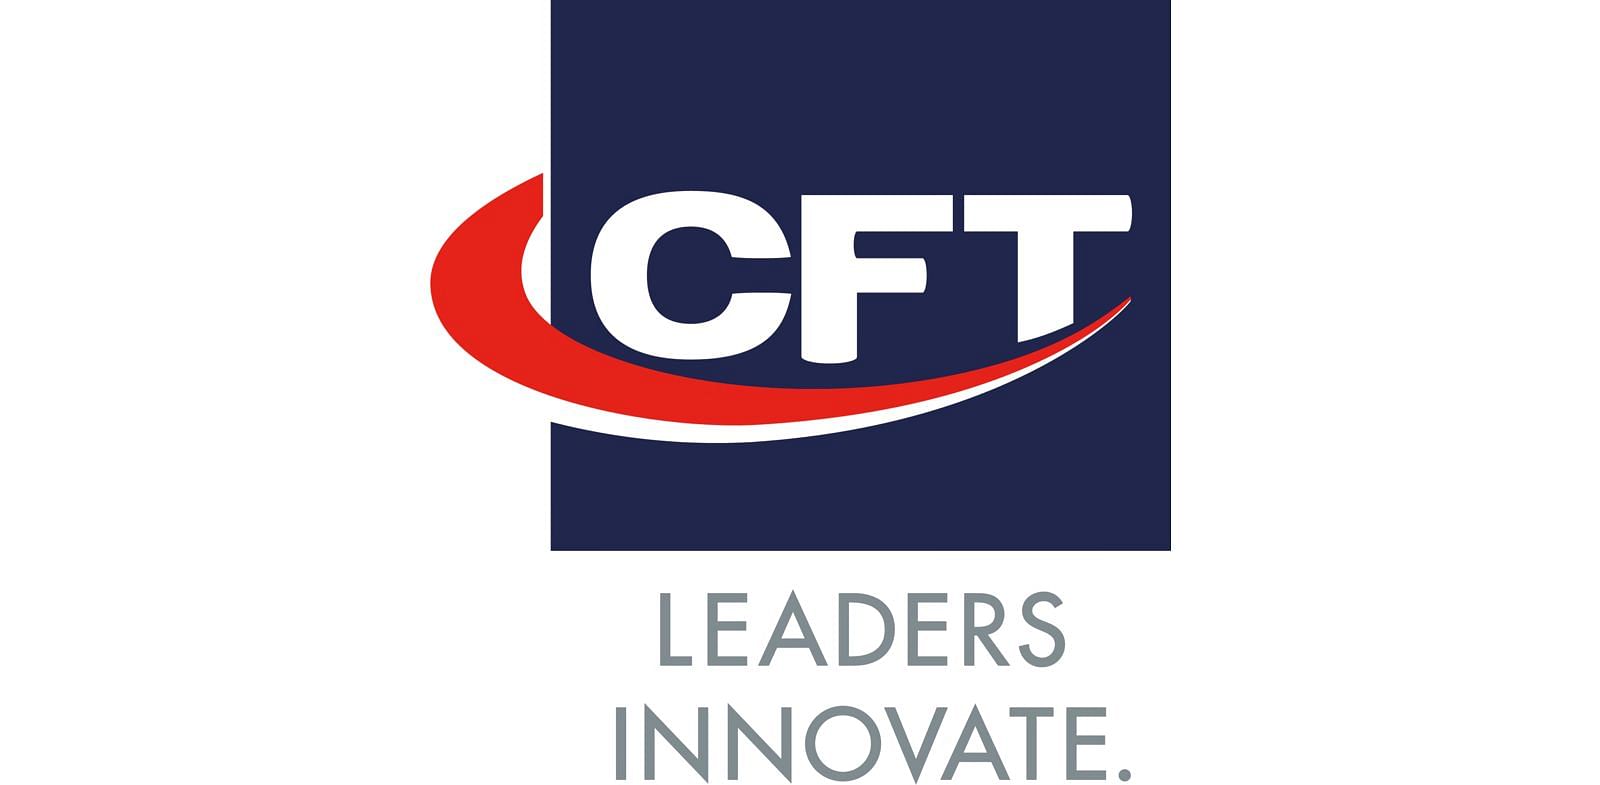 CFT-Group